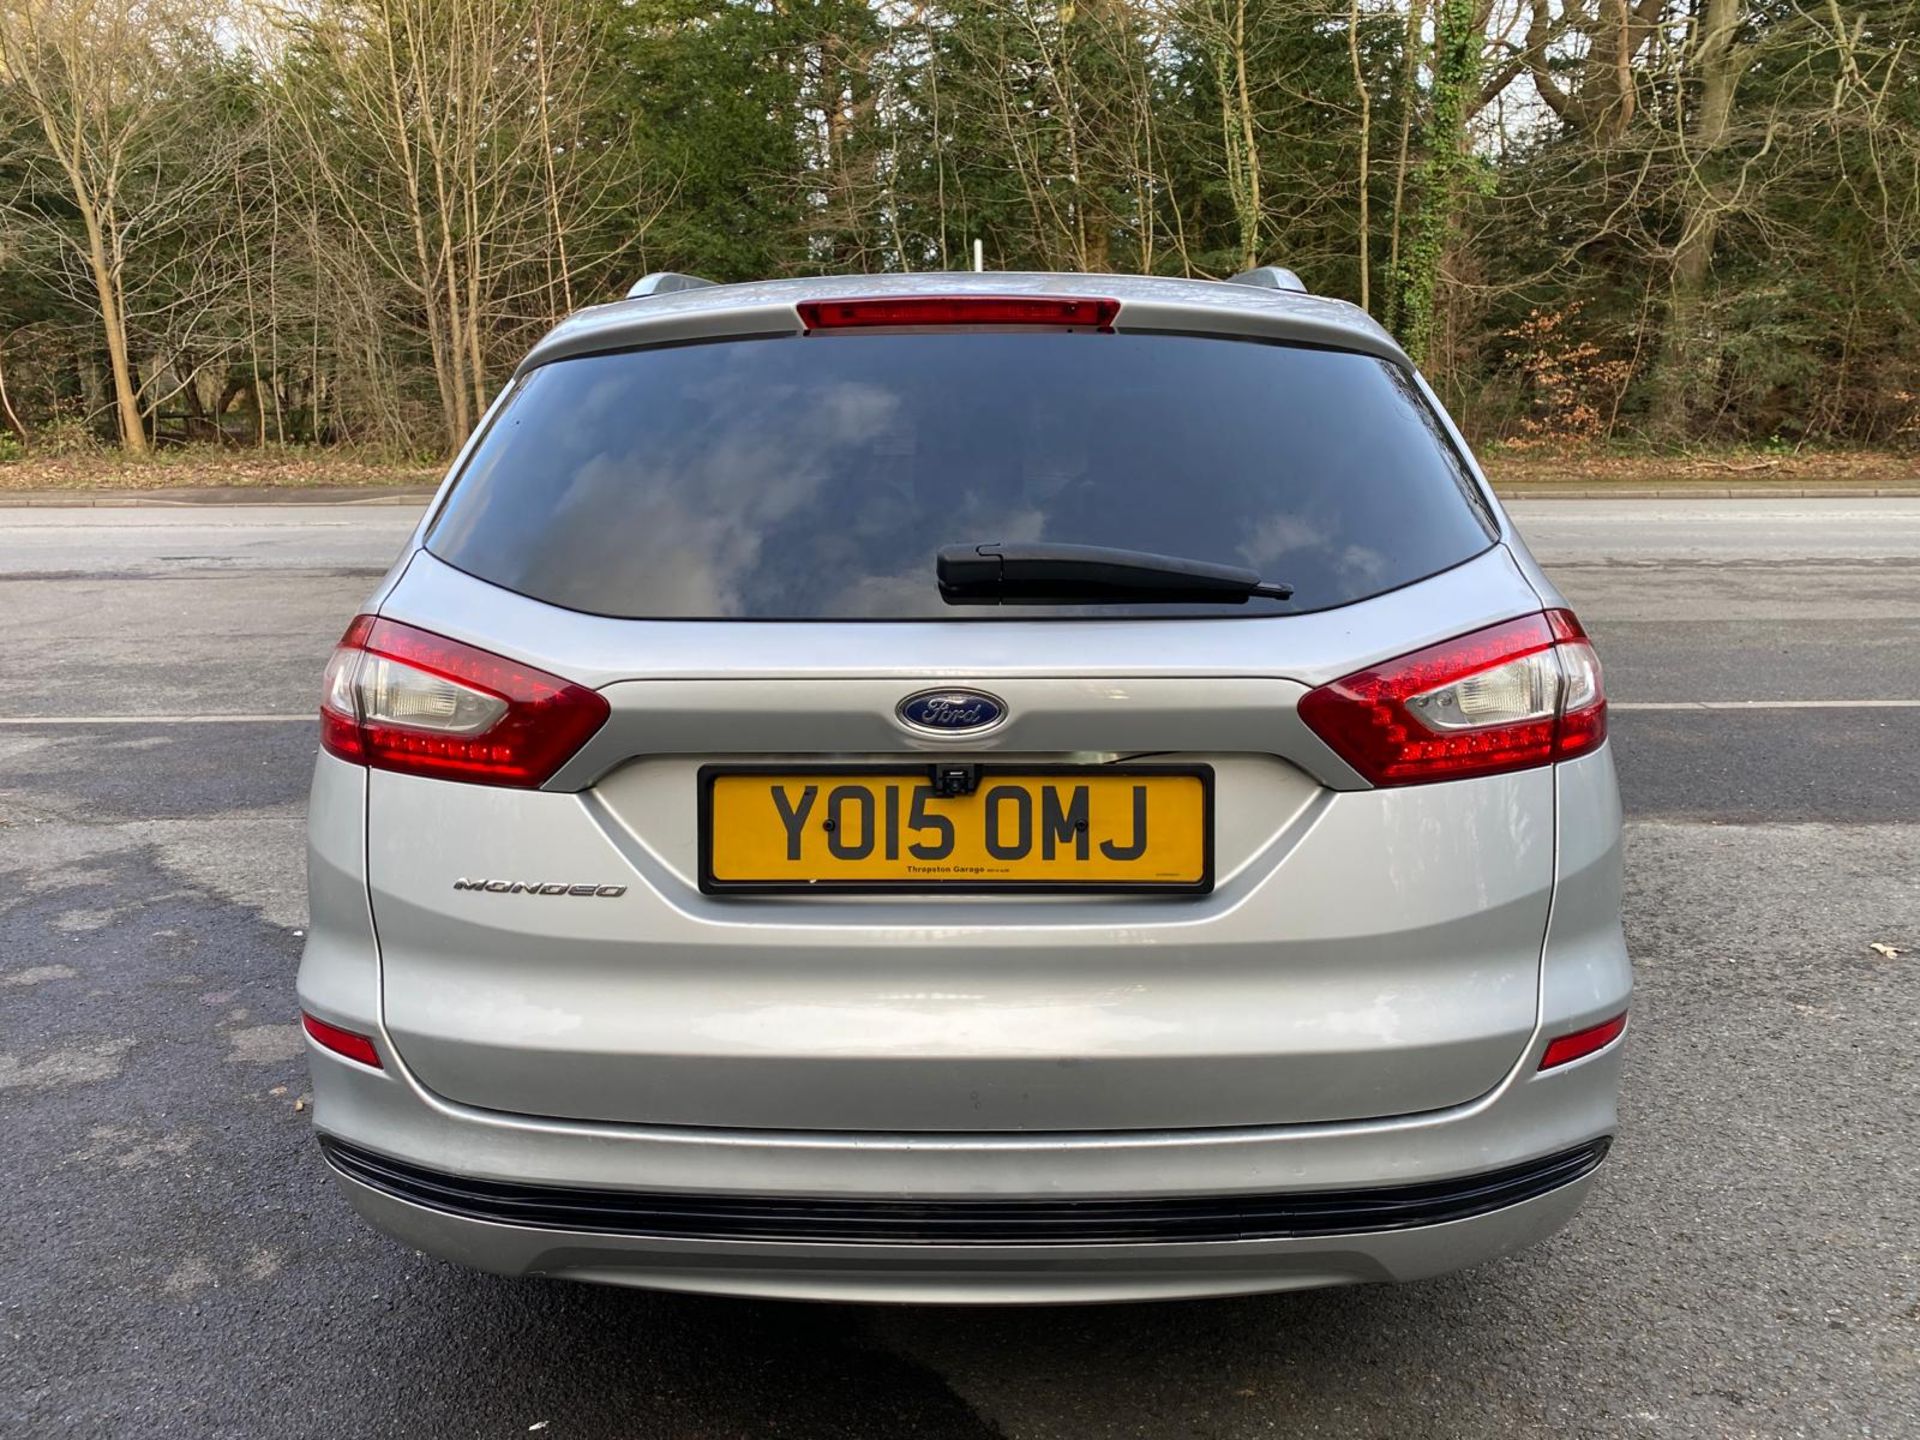 2015 FORD MONDEO TITANIUM ( X PACK ) ESTATE - 155K MILES - 2 KEYS - FSH & RECEIPTS FOR WORK PRESENT  - Image 6 of 19